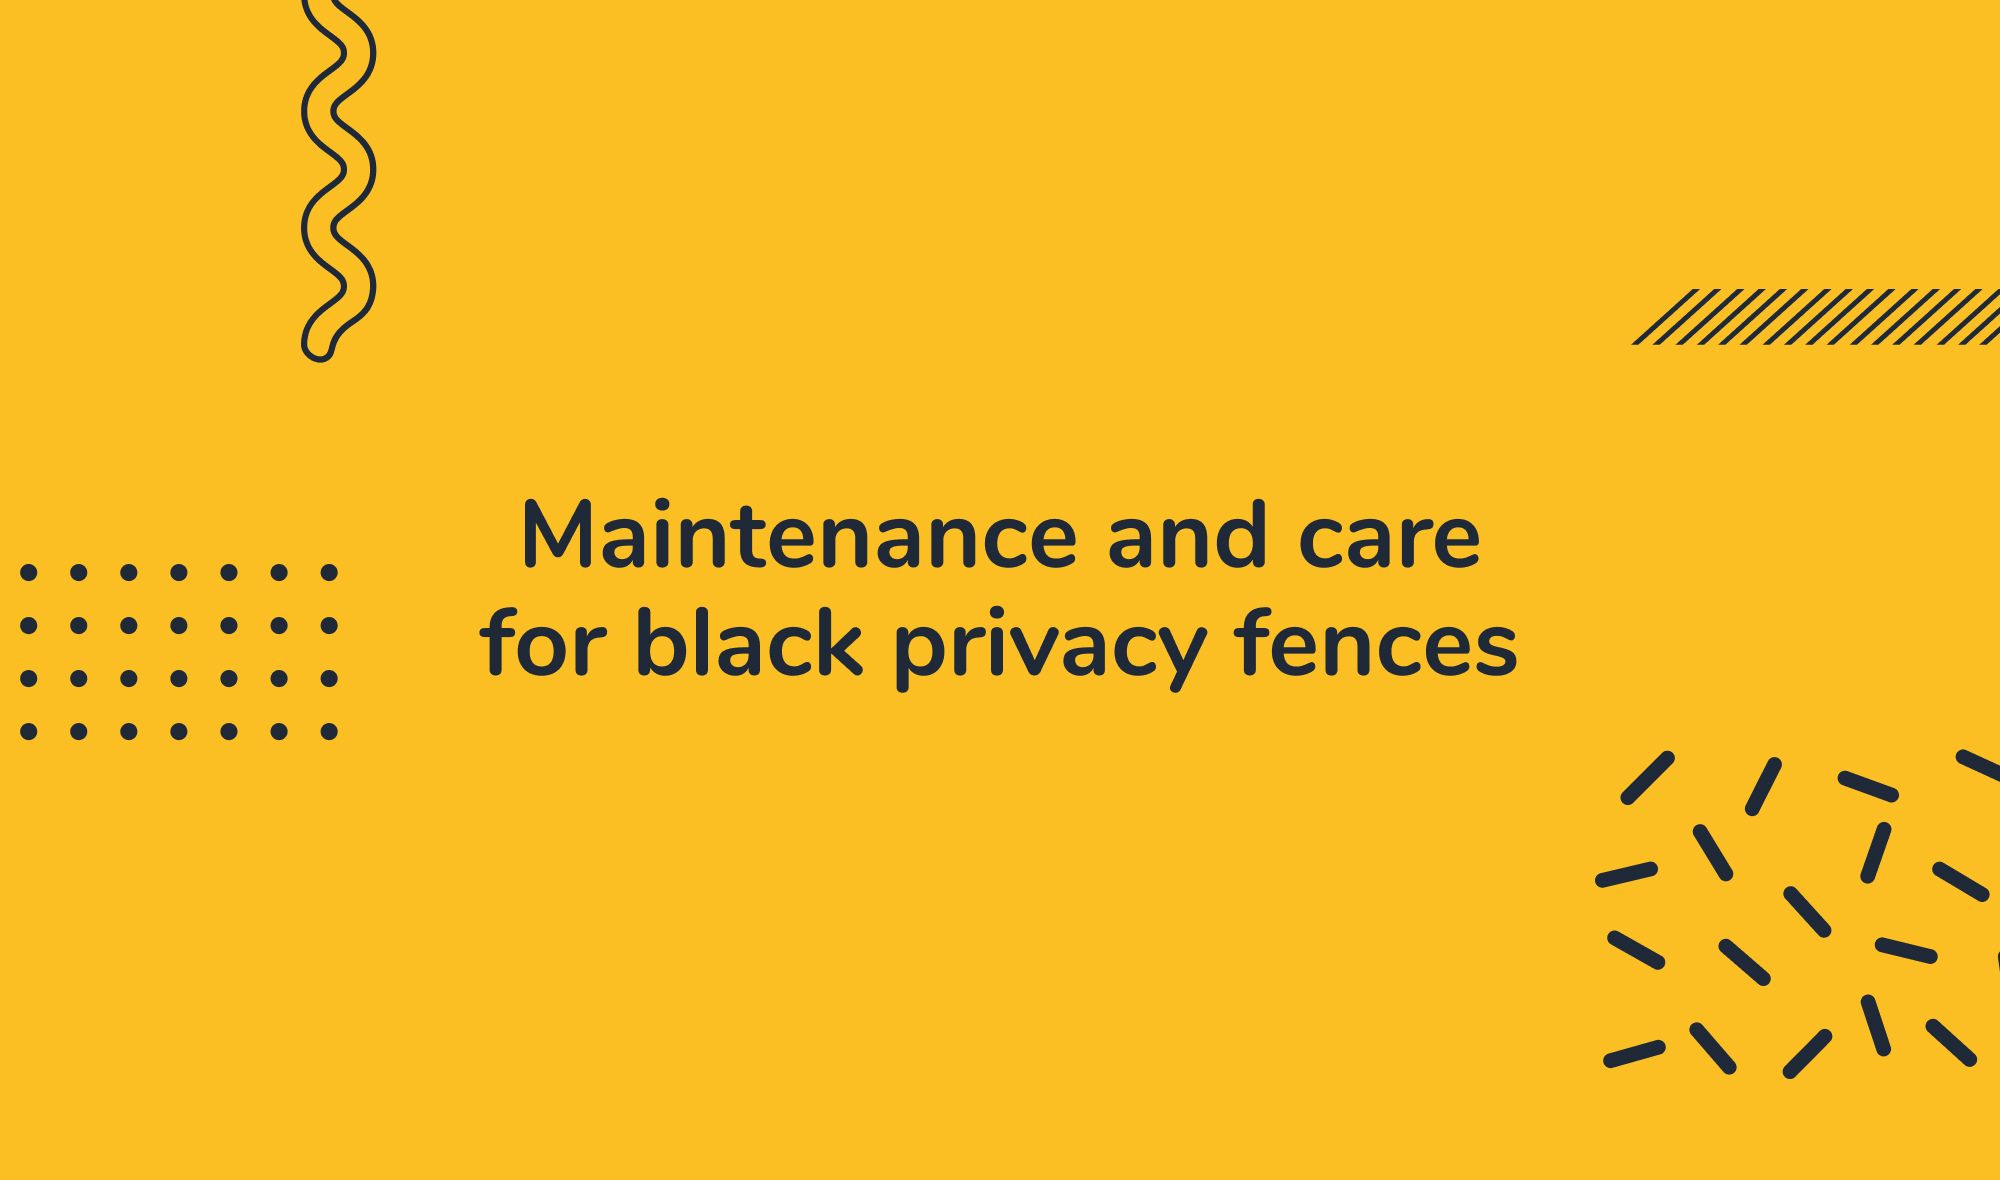 Maintenance and care for black privacy fences